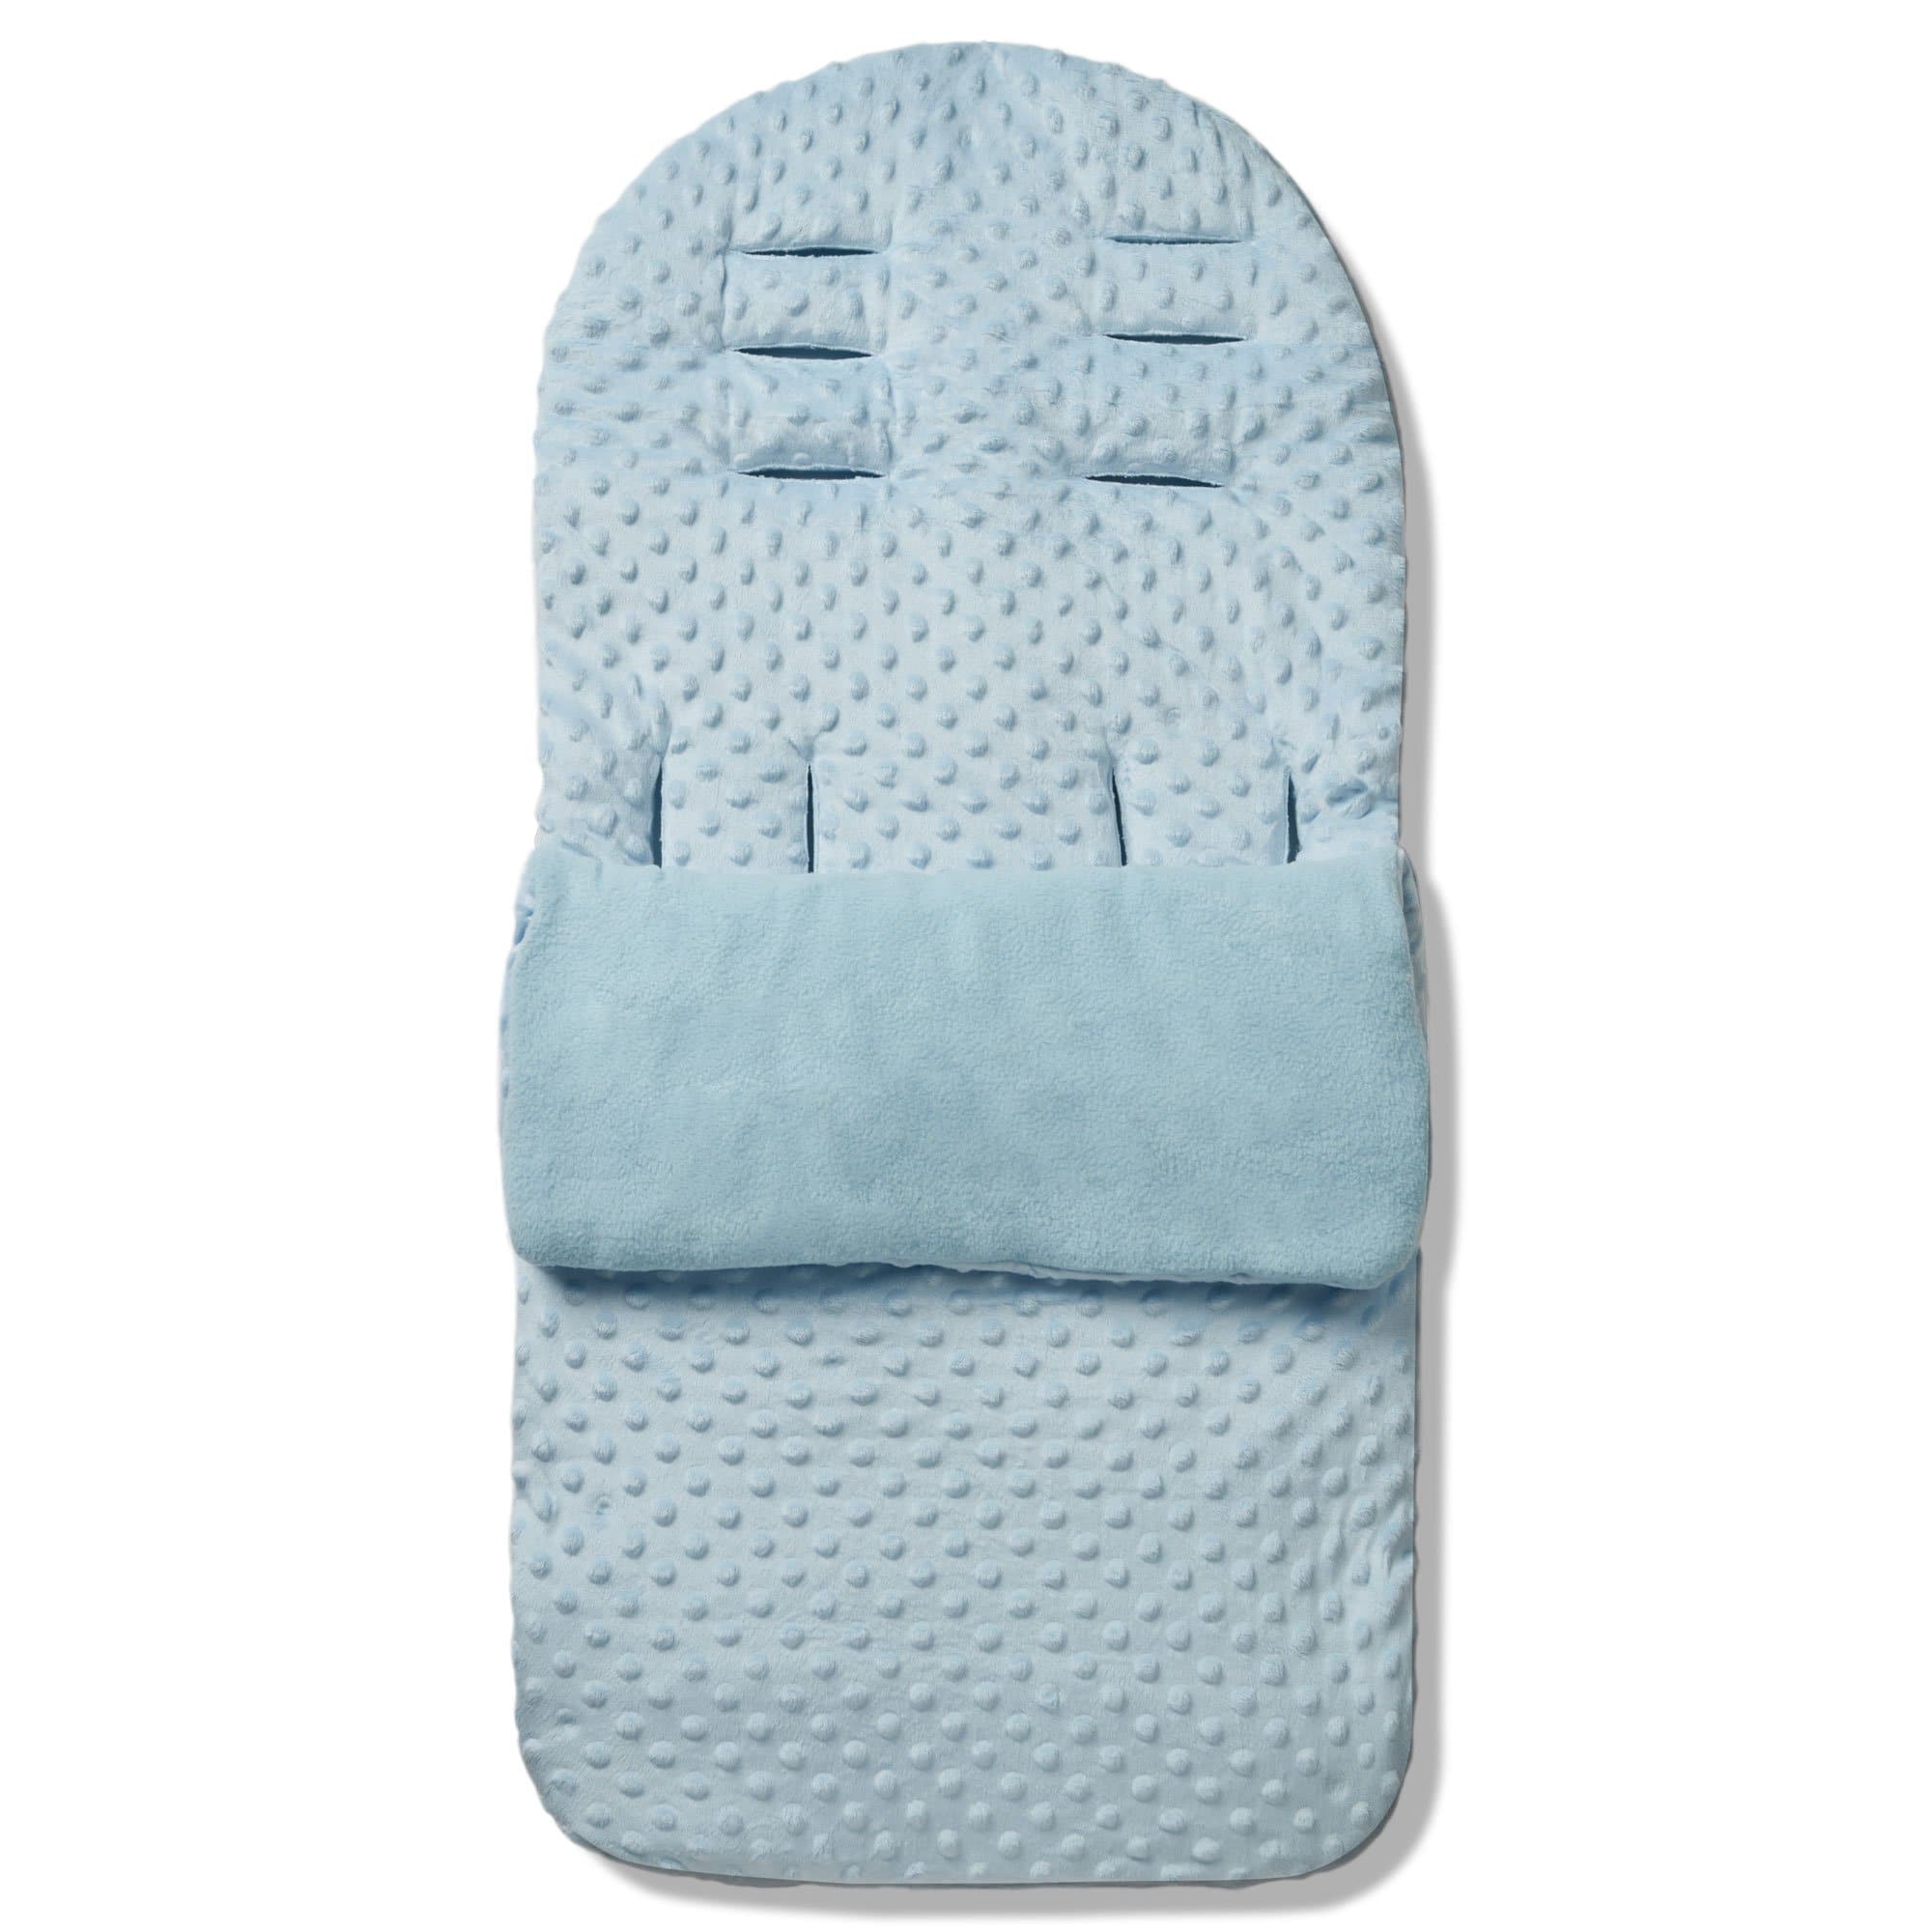 Dimple Footmuff / Cosy Toes Compatible with iCandy - Blue / Fits All Models | For Your Little One